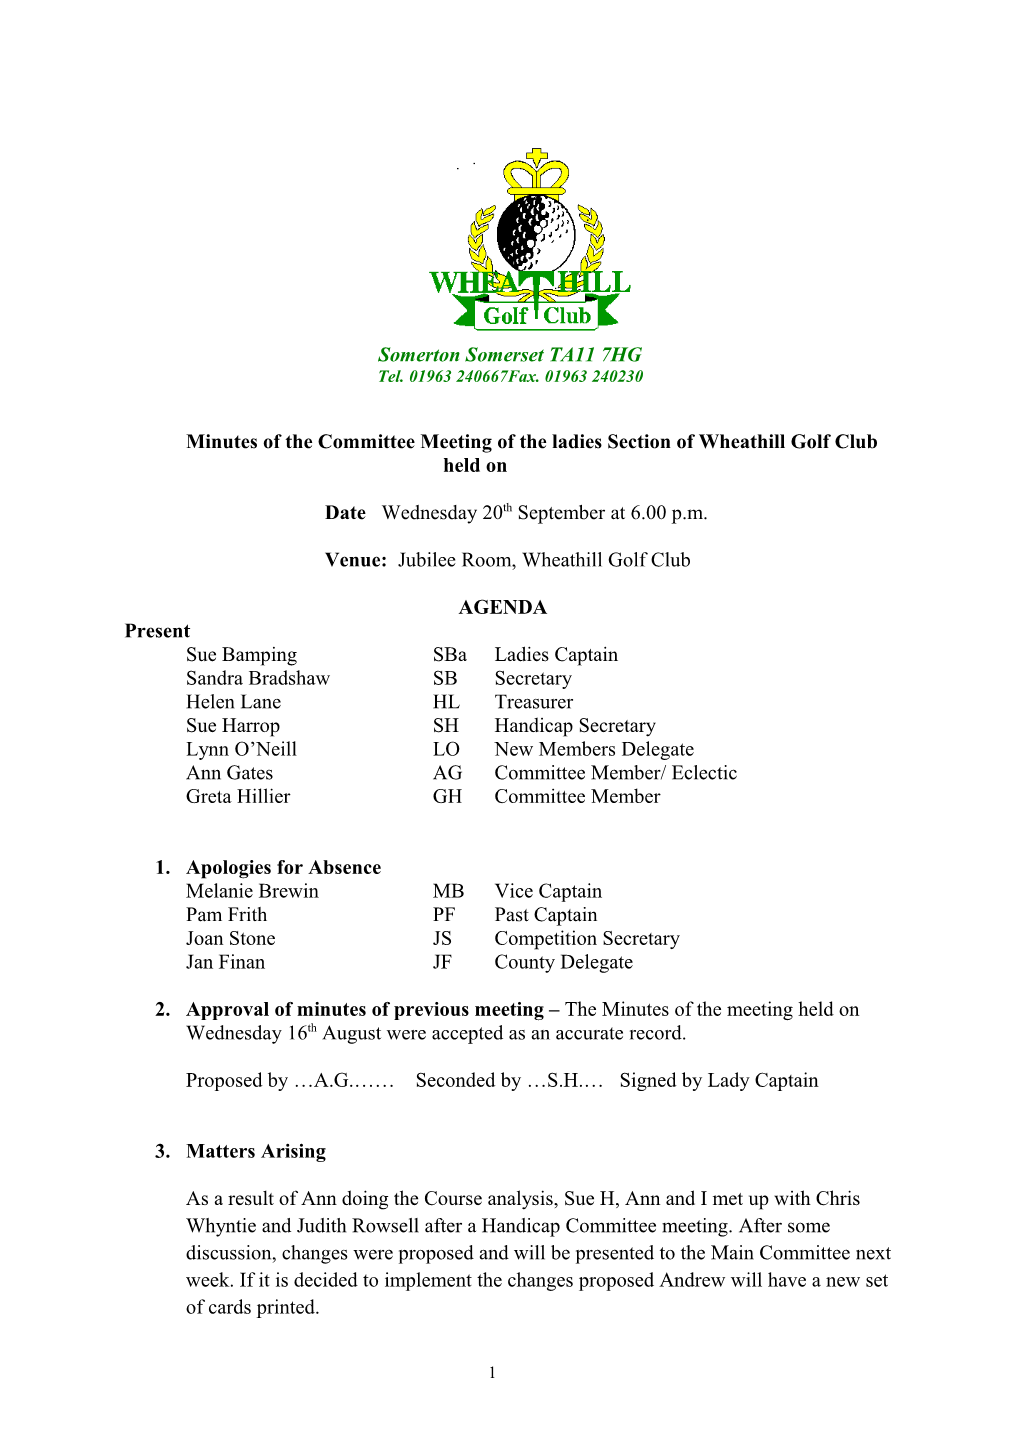 Minutes of the Committee Meeting of the Ladies Section of Wheathill Golf Club